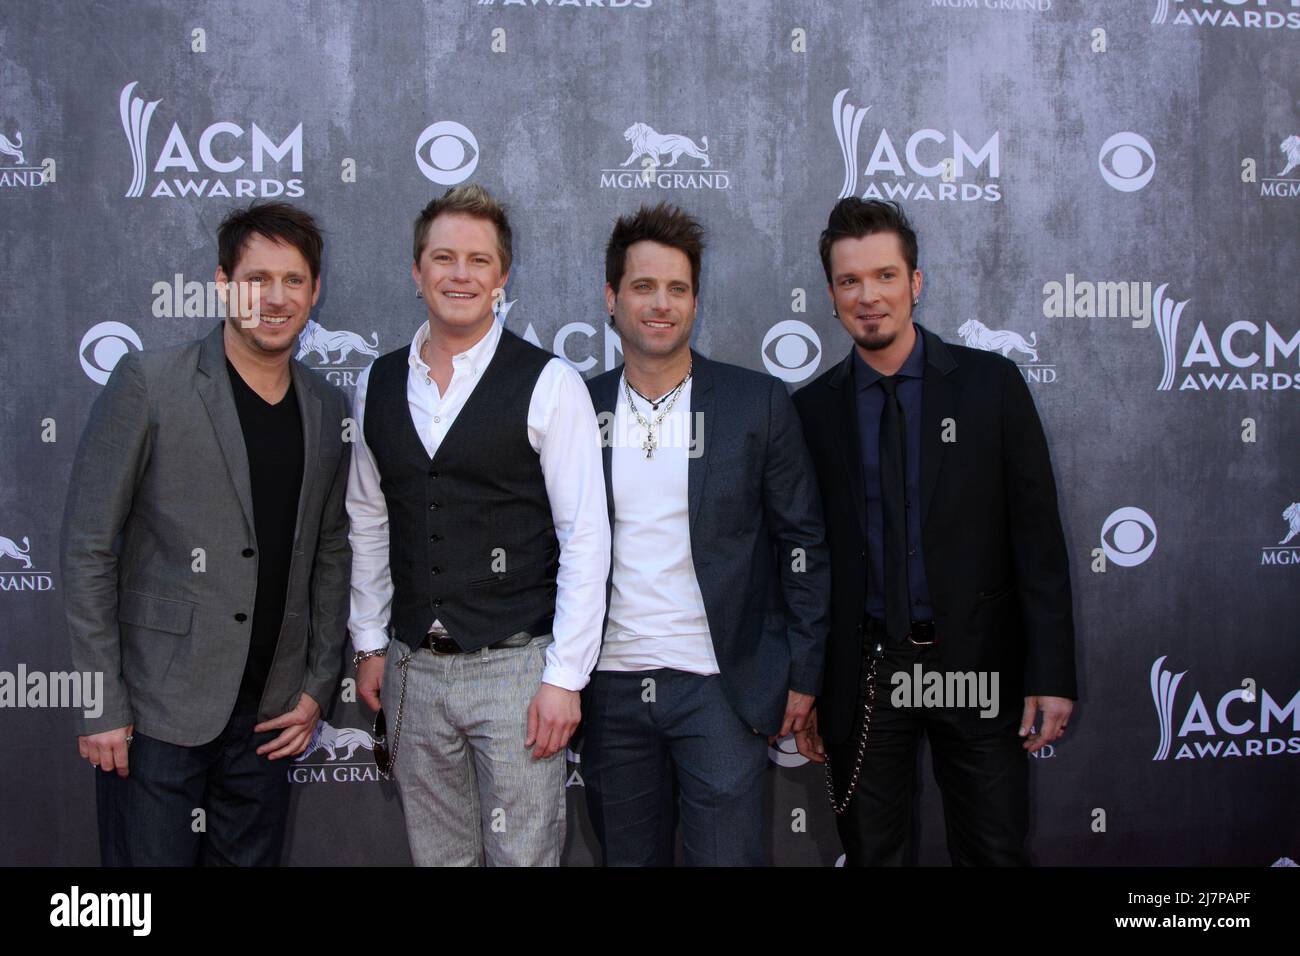 LAS VEGAS - APR 6:  Parmalee at the 2014 Academy of Country Music Awards - Arrivals at MGM Grand Garden Arena on April 6, 2014 in Las Vegas, NV Stock Photo